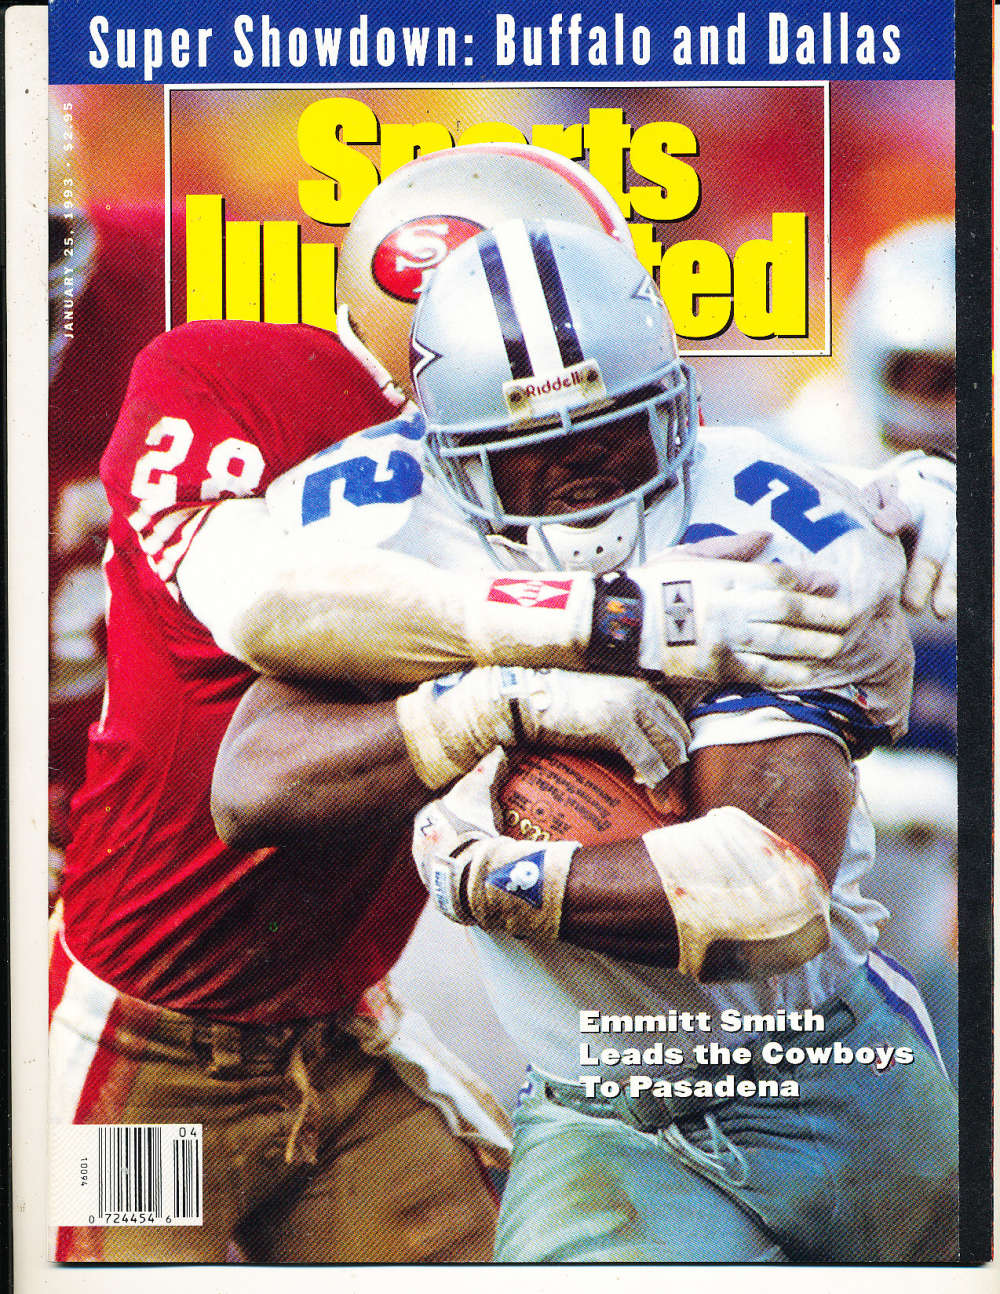 1/25 1993 Emmitt Smith Dallas Cowboys Sports Illustrated Newsstand No Label s4